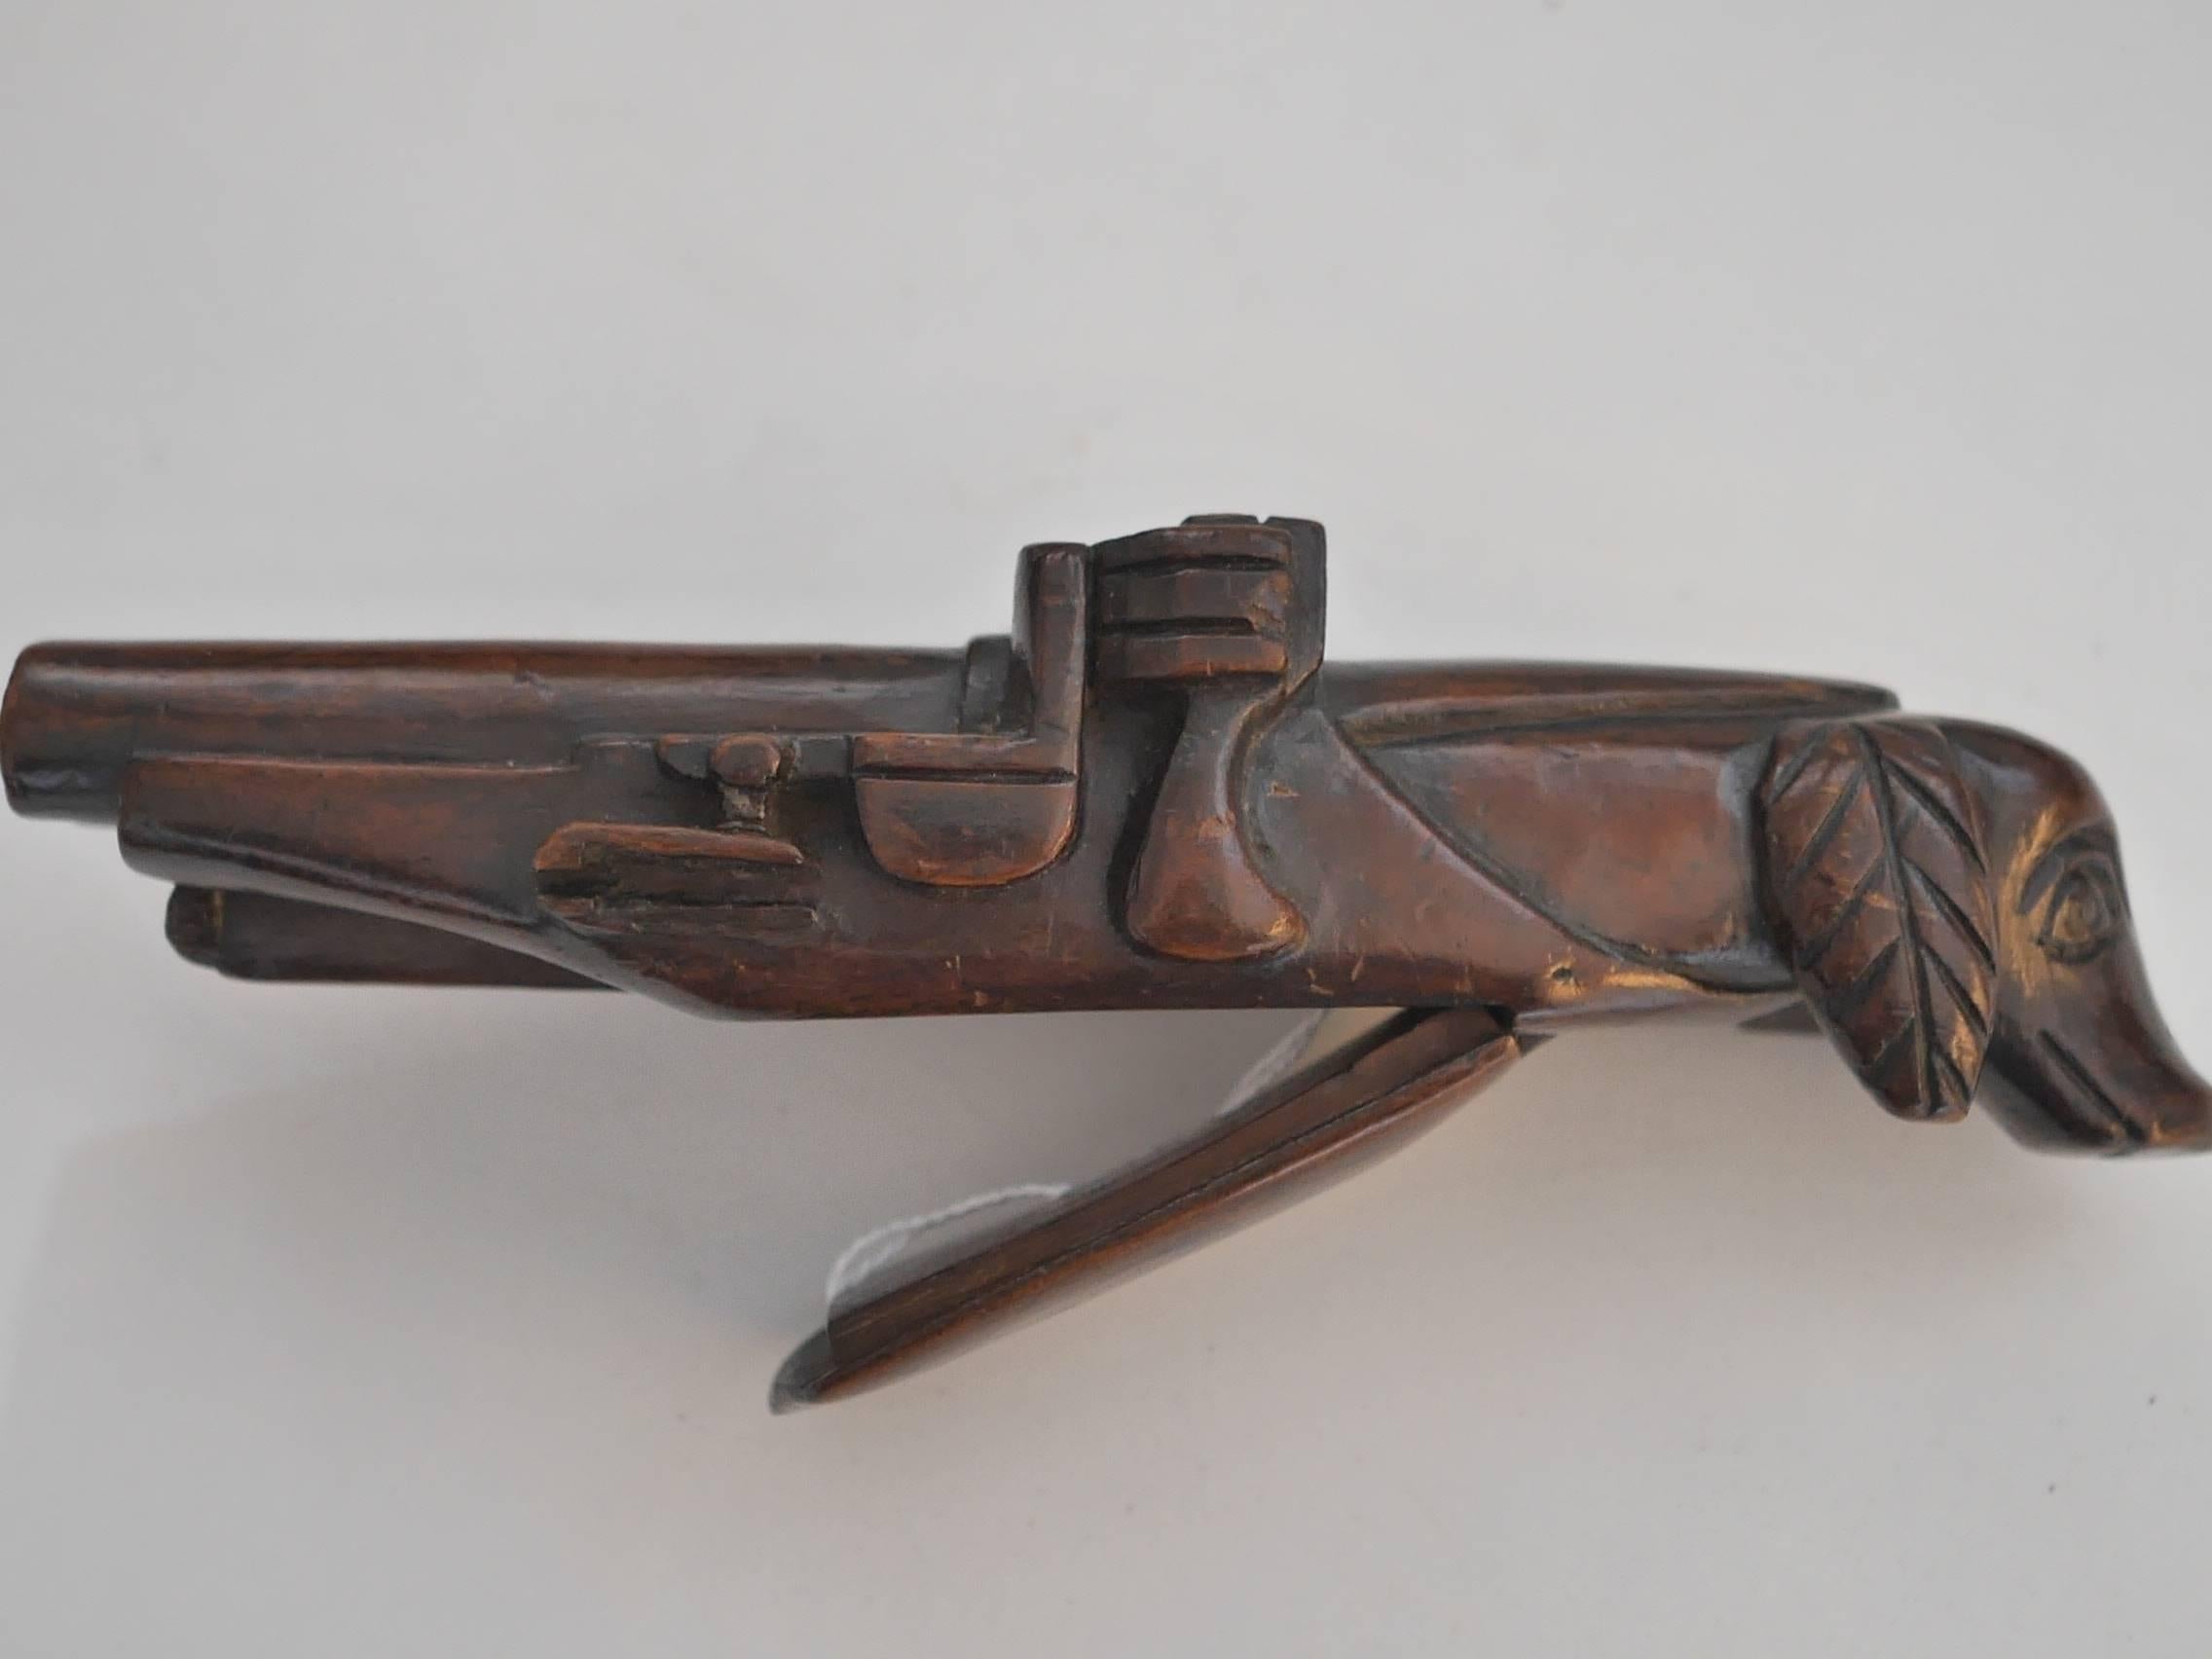 Mahogany wood carved snuffbox featuring a retriever on one side and a gun barrel on the other. 
The tobacco was placed on the little box underneath.

This object belonged to the 